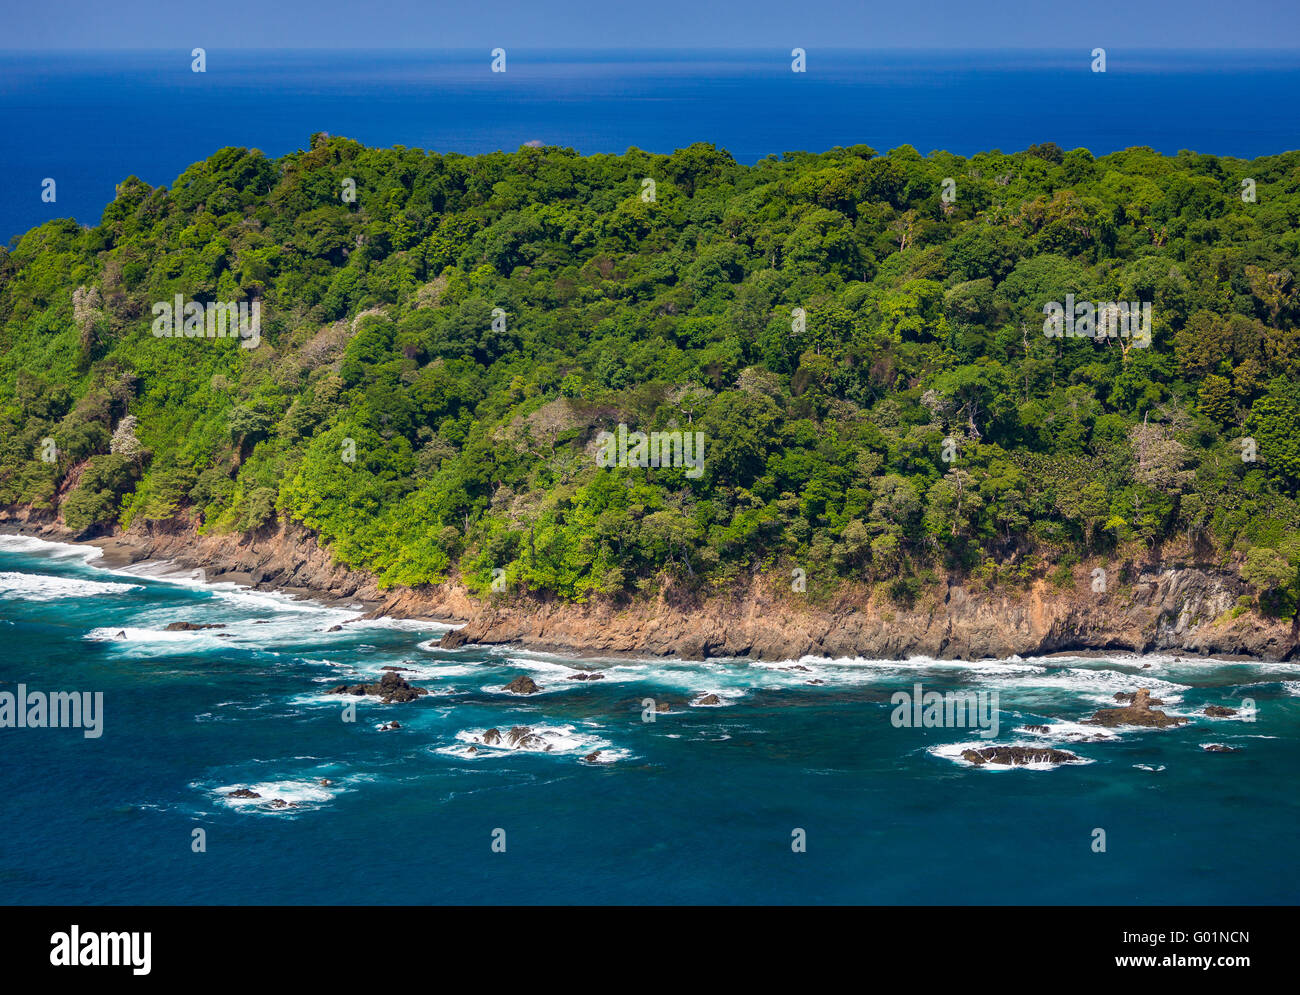 ISLA DEL CANO,, COSTA RICA - Aerial of Cano Island National Park, an Island in Pacific Ocean offshore from Osa Peninsula. Stock Photo